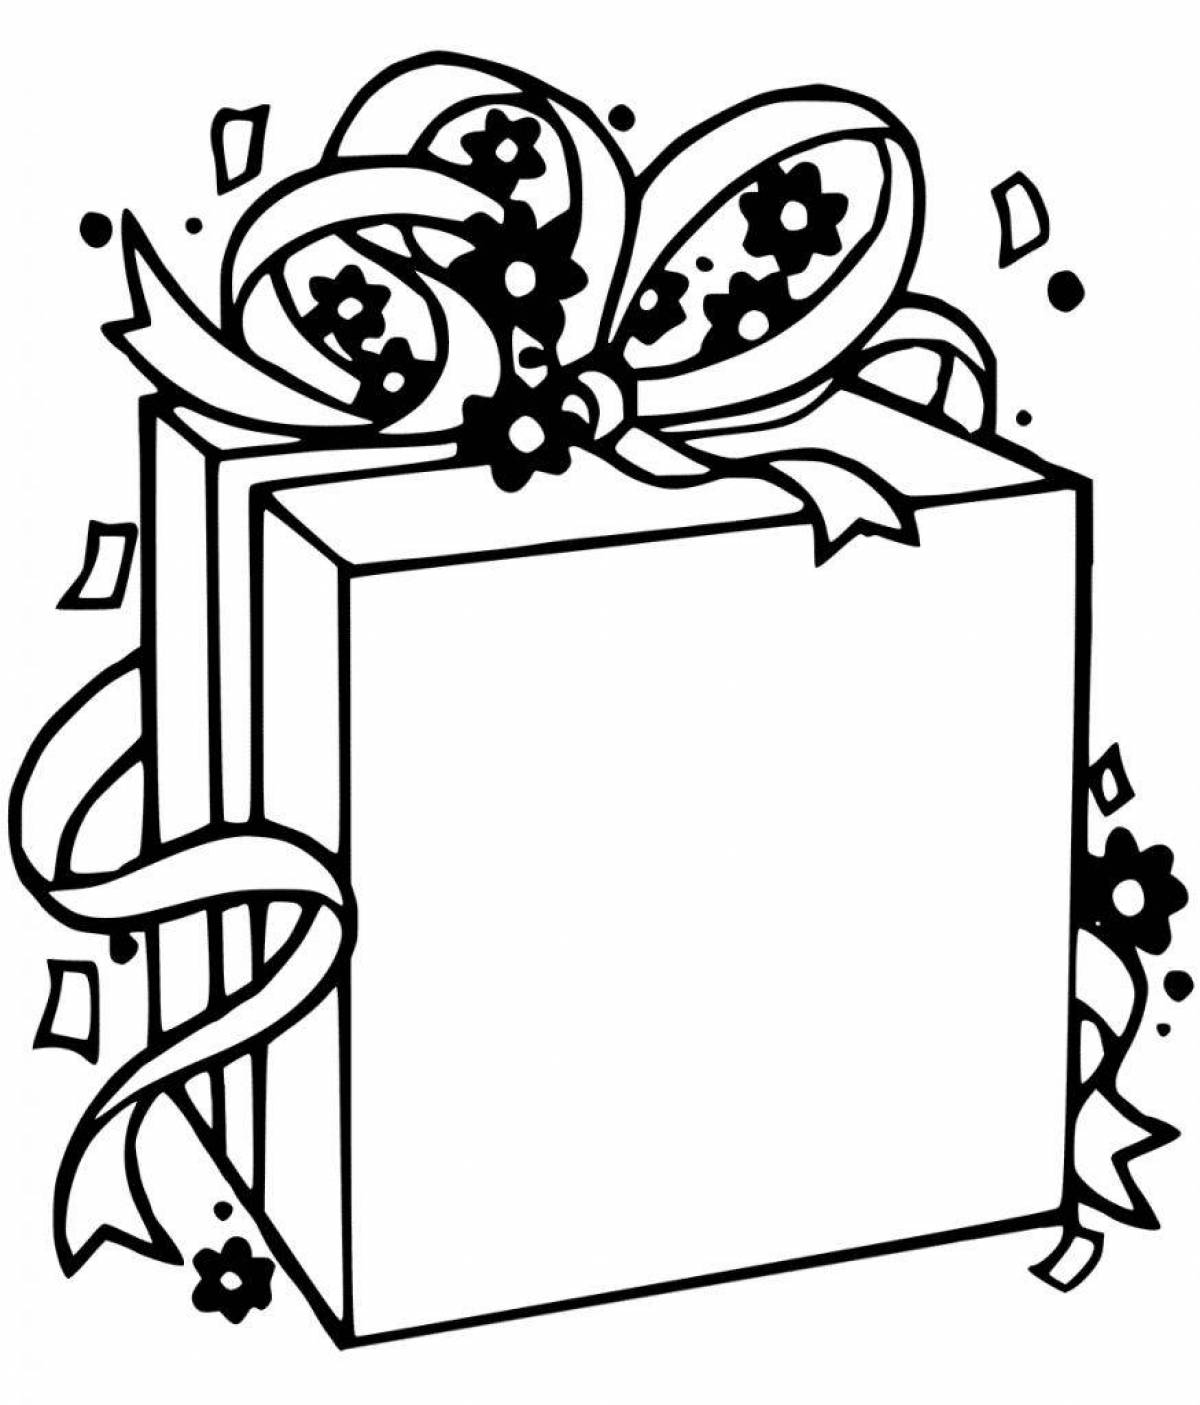 Coloring page sweet birthday present